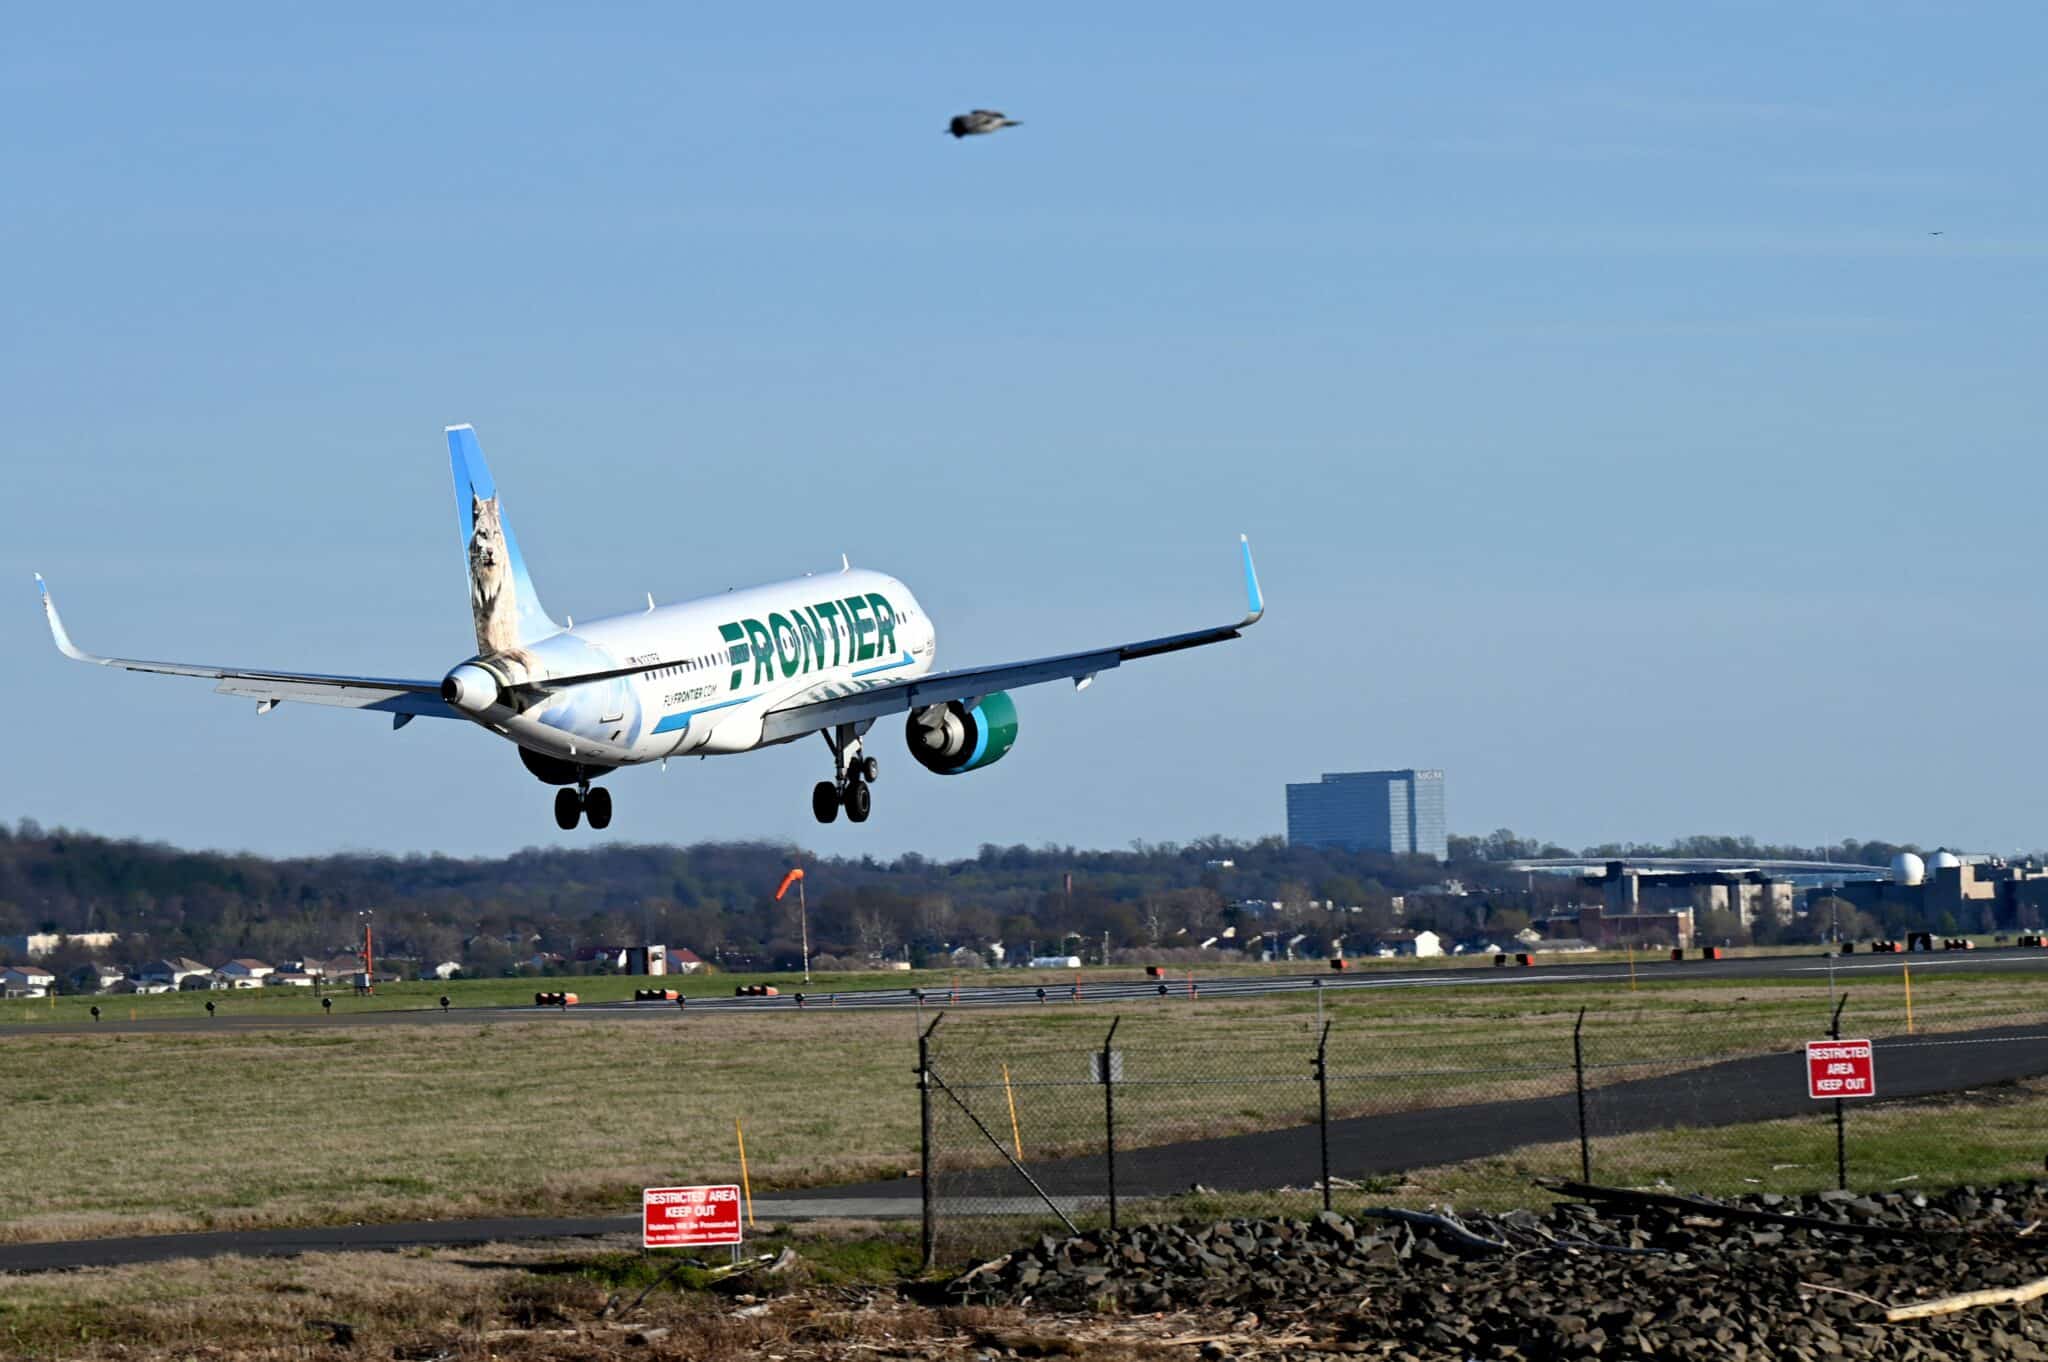 A Frontier Airlines plane approaches the runway at Ronald Reagan Washington National Airport (DCA) in Arlington, Virginia, on April 2, 2022. (Photo by Daniel SLIM / AFP) (Photo by DANIEL SLIM/AFP via Getty Images)